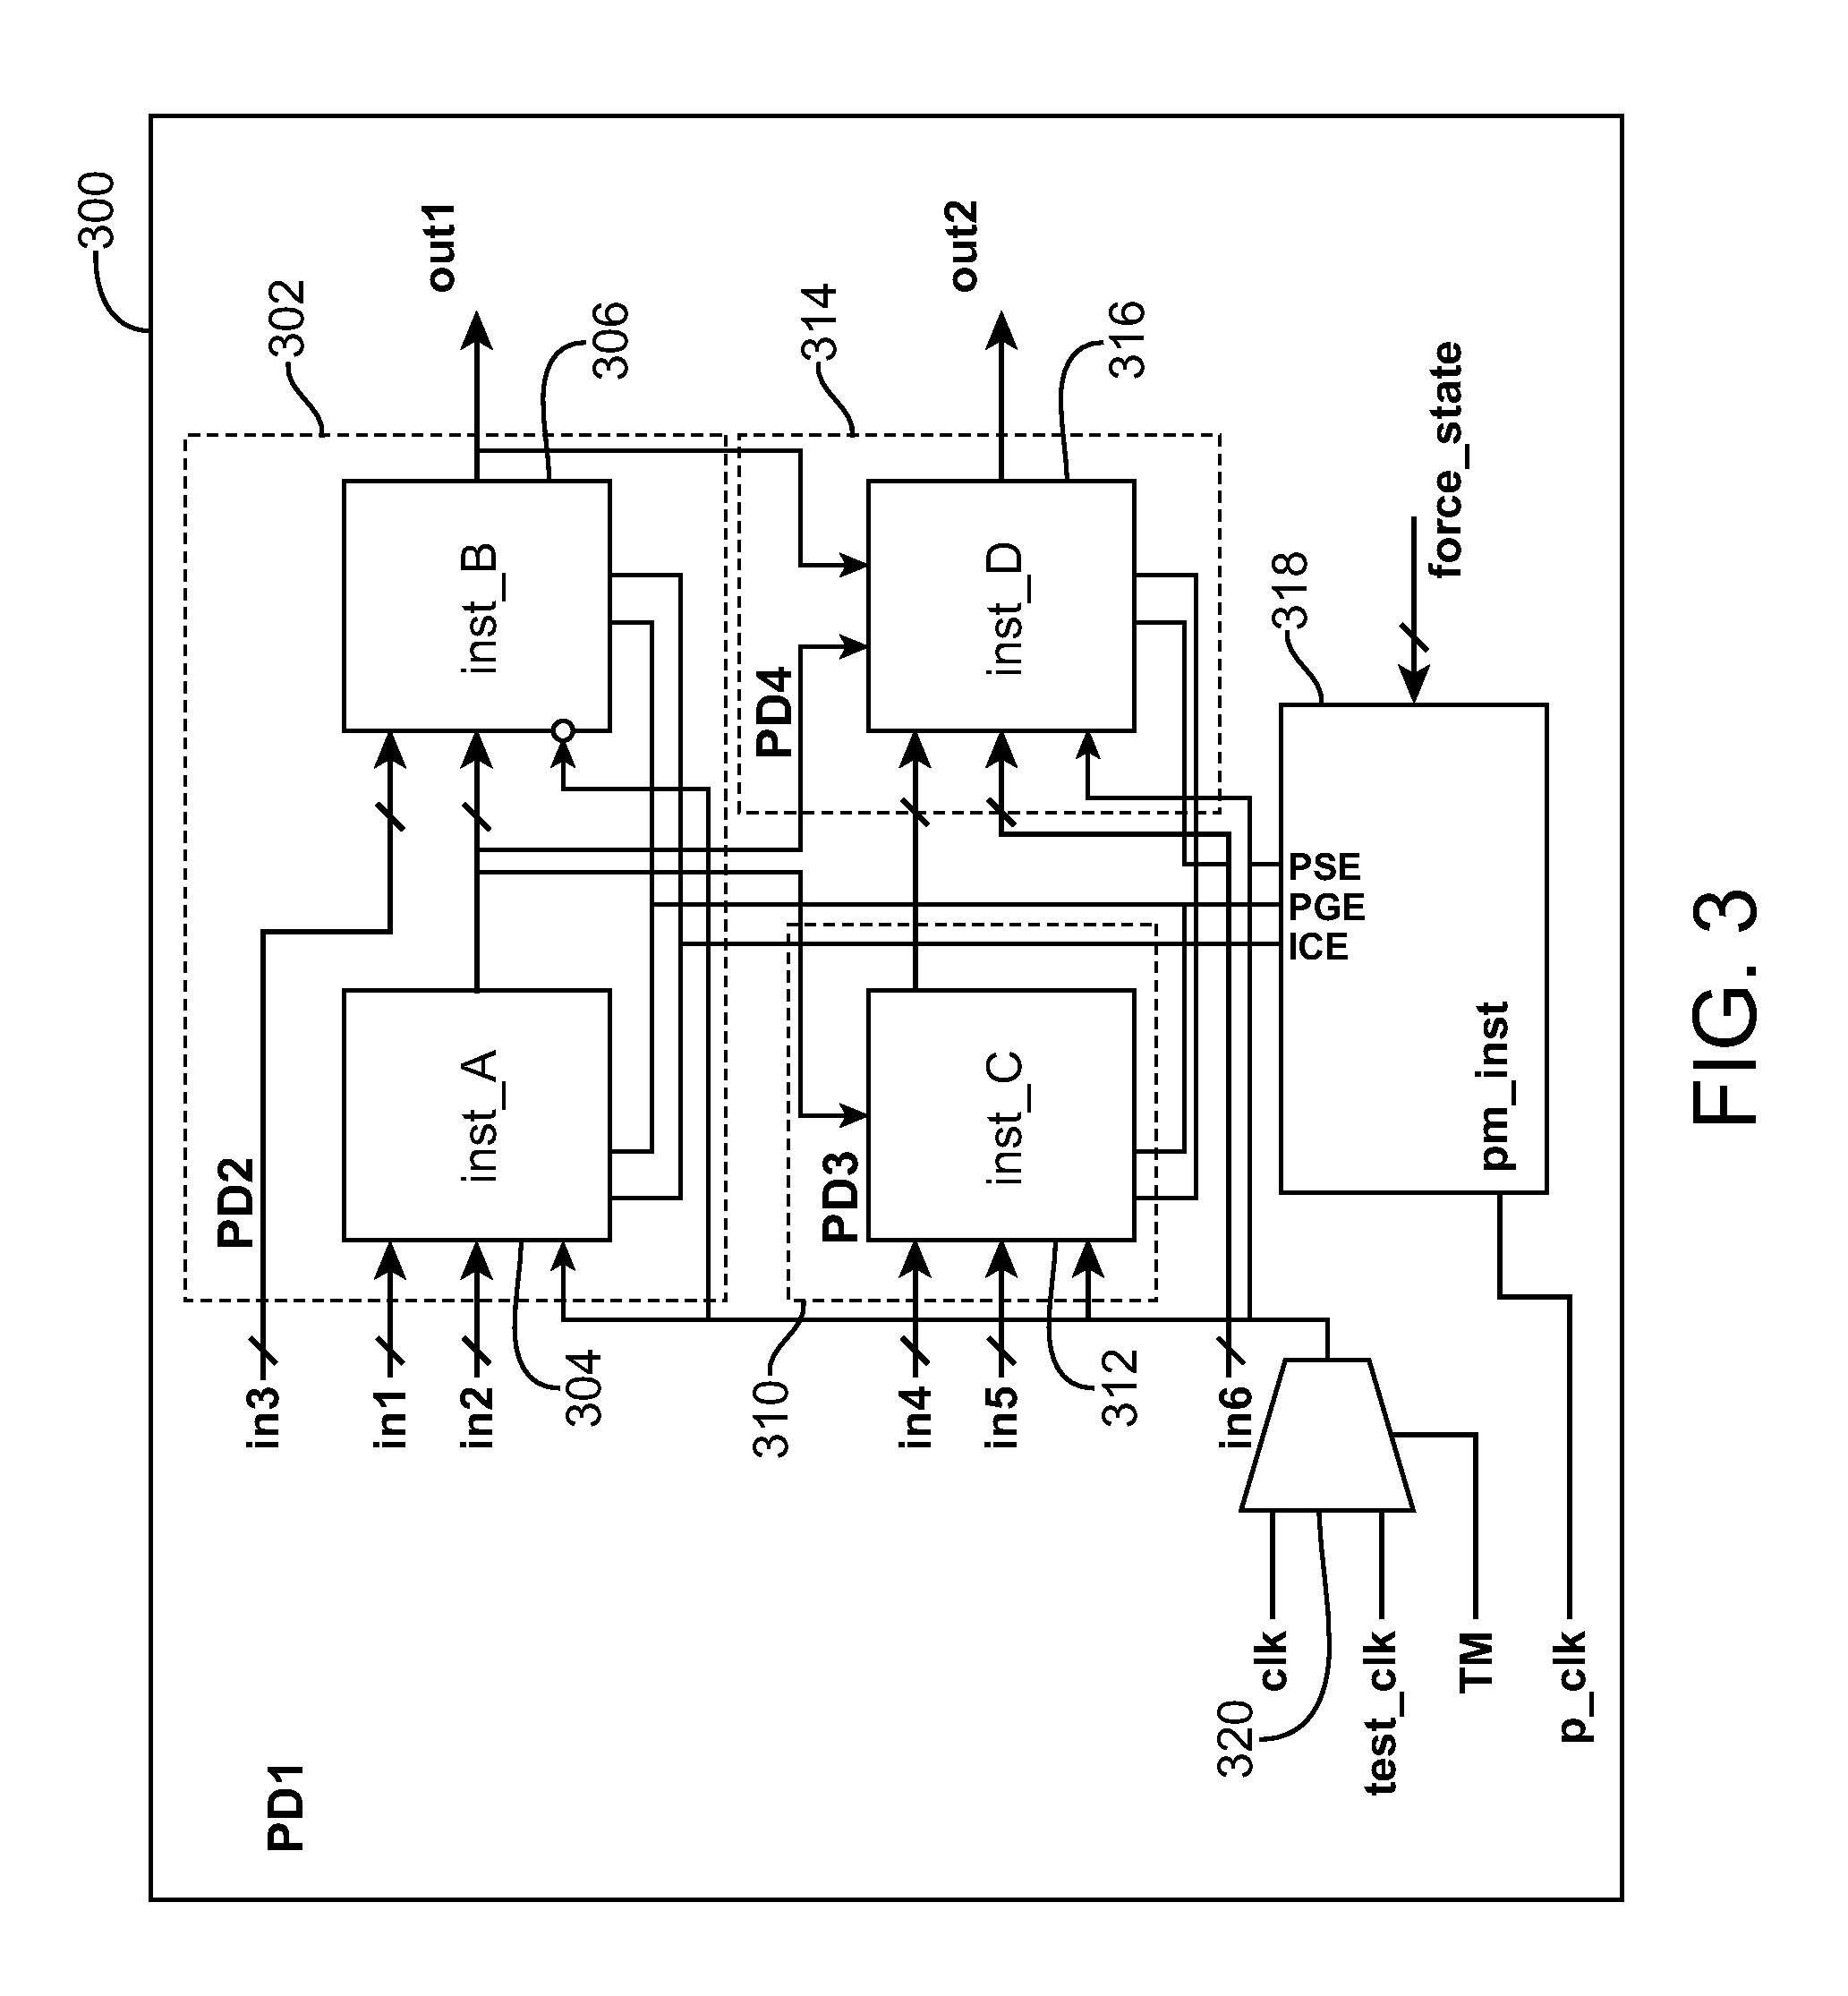 High level IC design with power specification and power source hierarchy